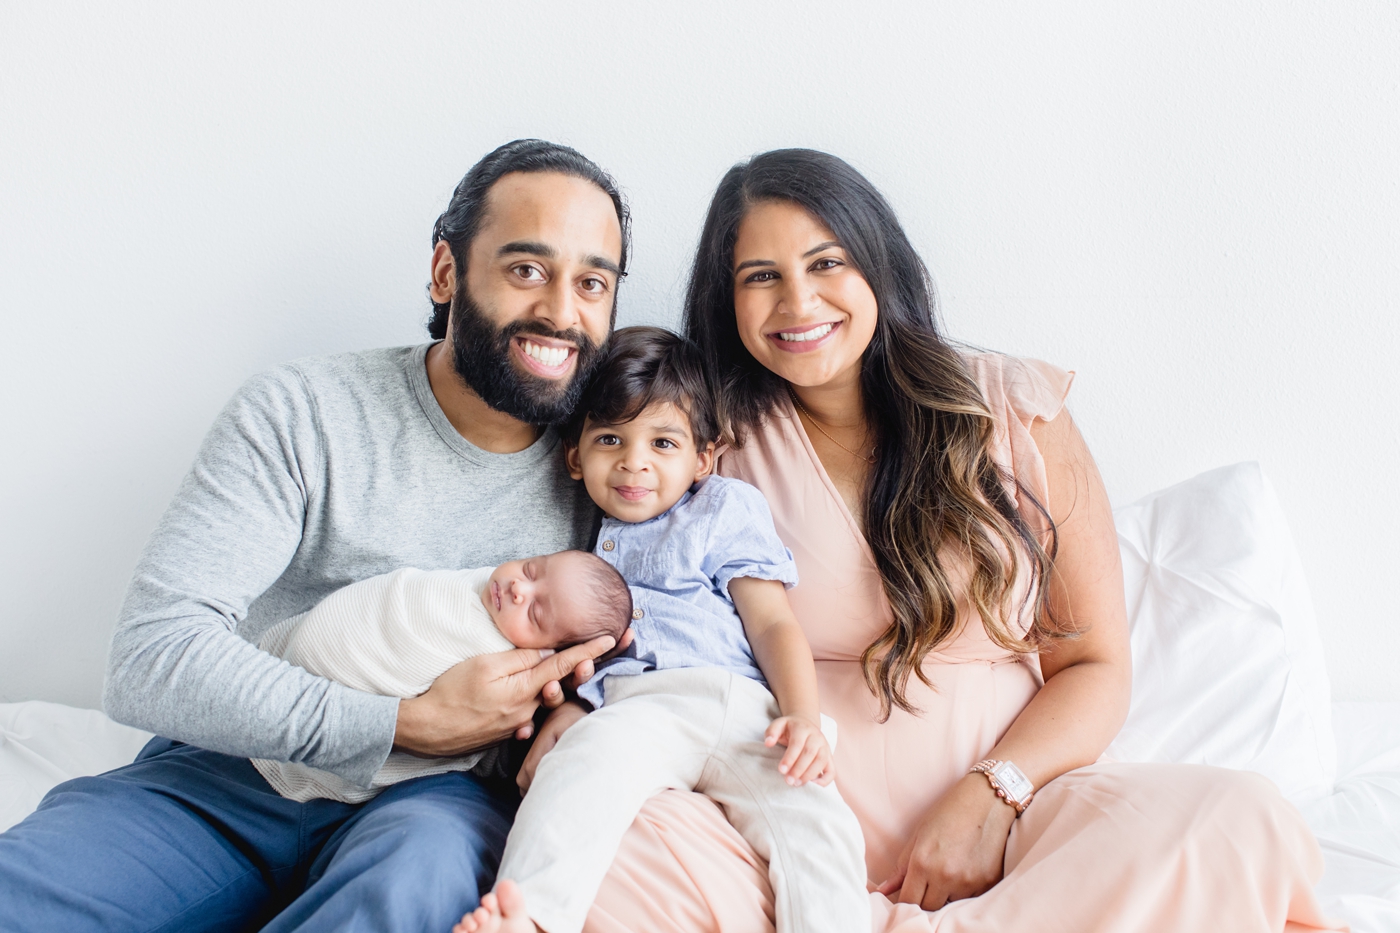 Sweet family photo of parents and toddler smiling at camera during newborn session. Photo by Sana Ahmed Photography.